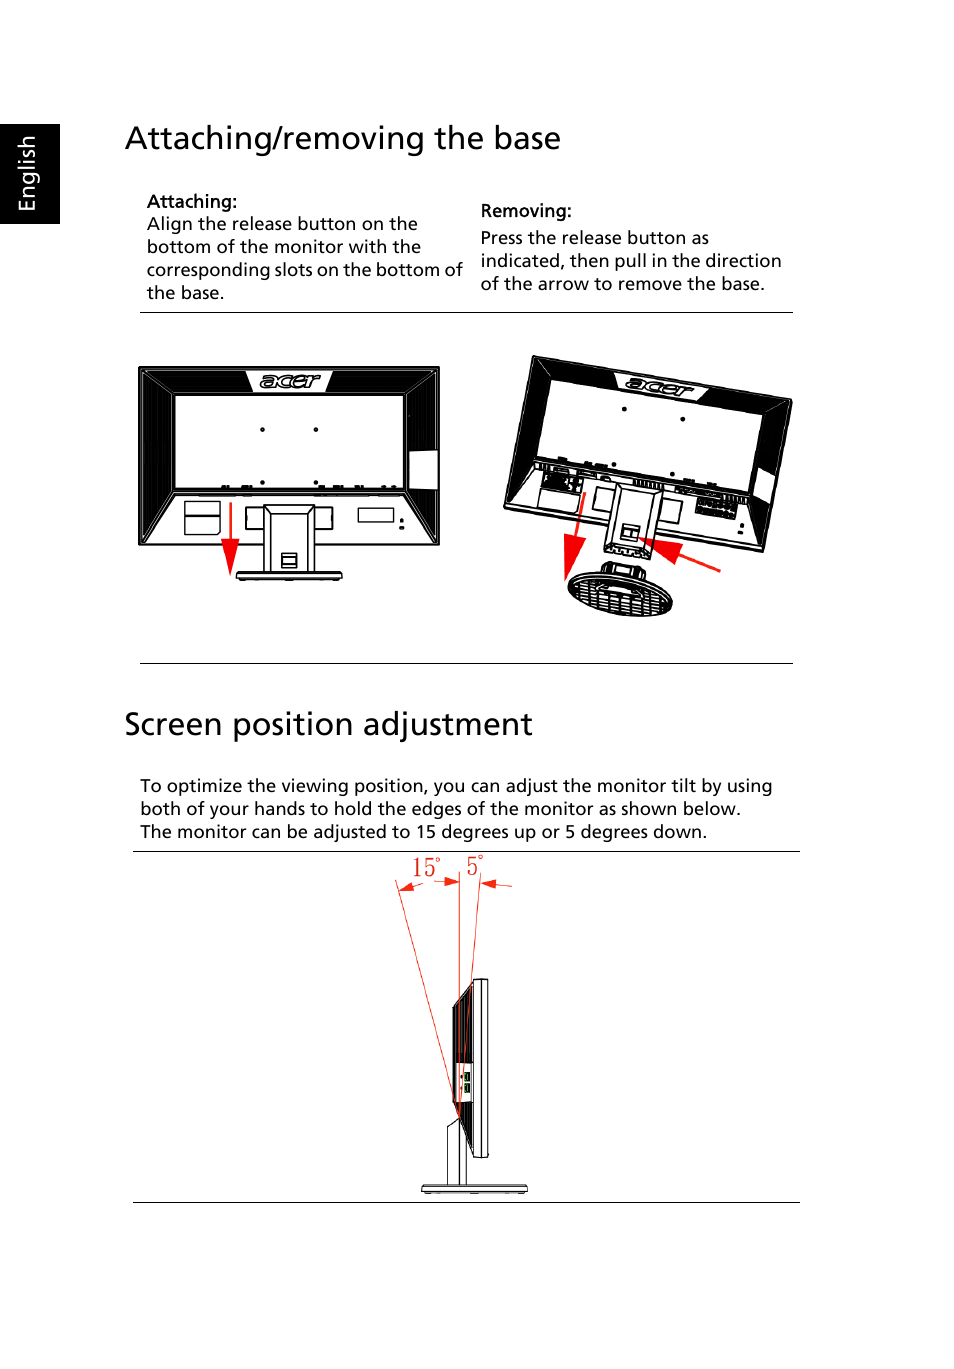 Attaching/removing the base, Screen position adjustment | Acer V243H